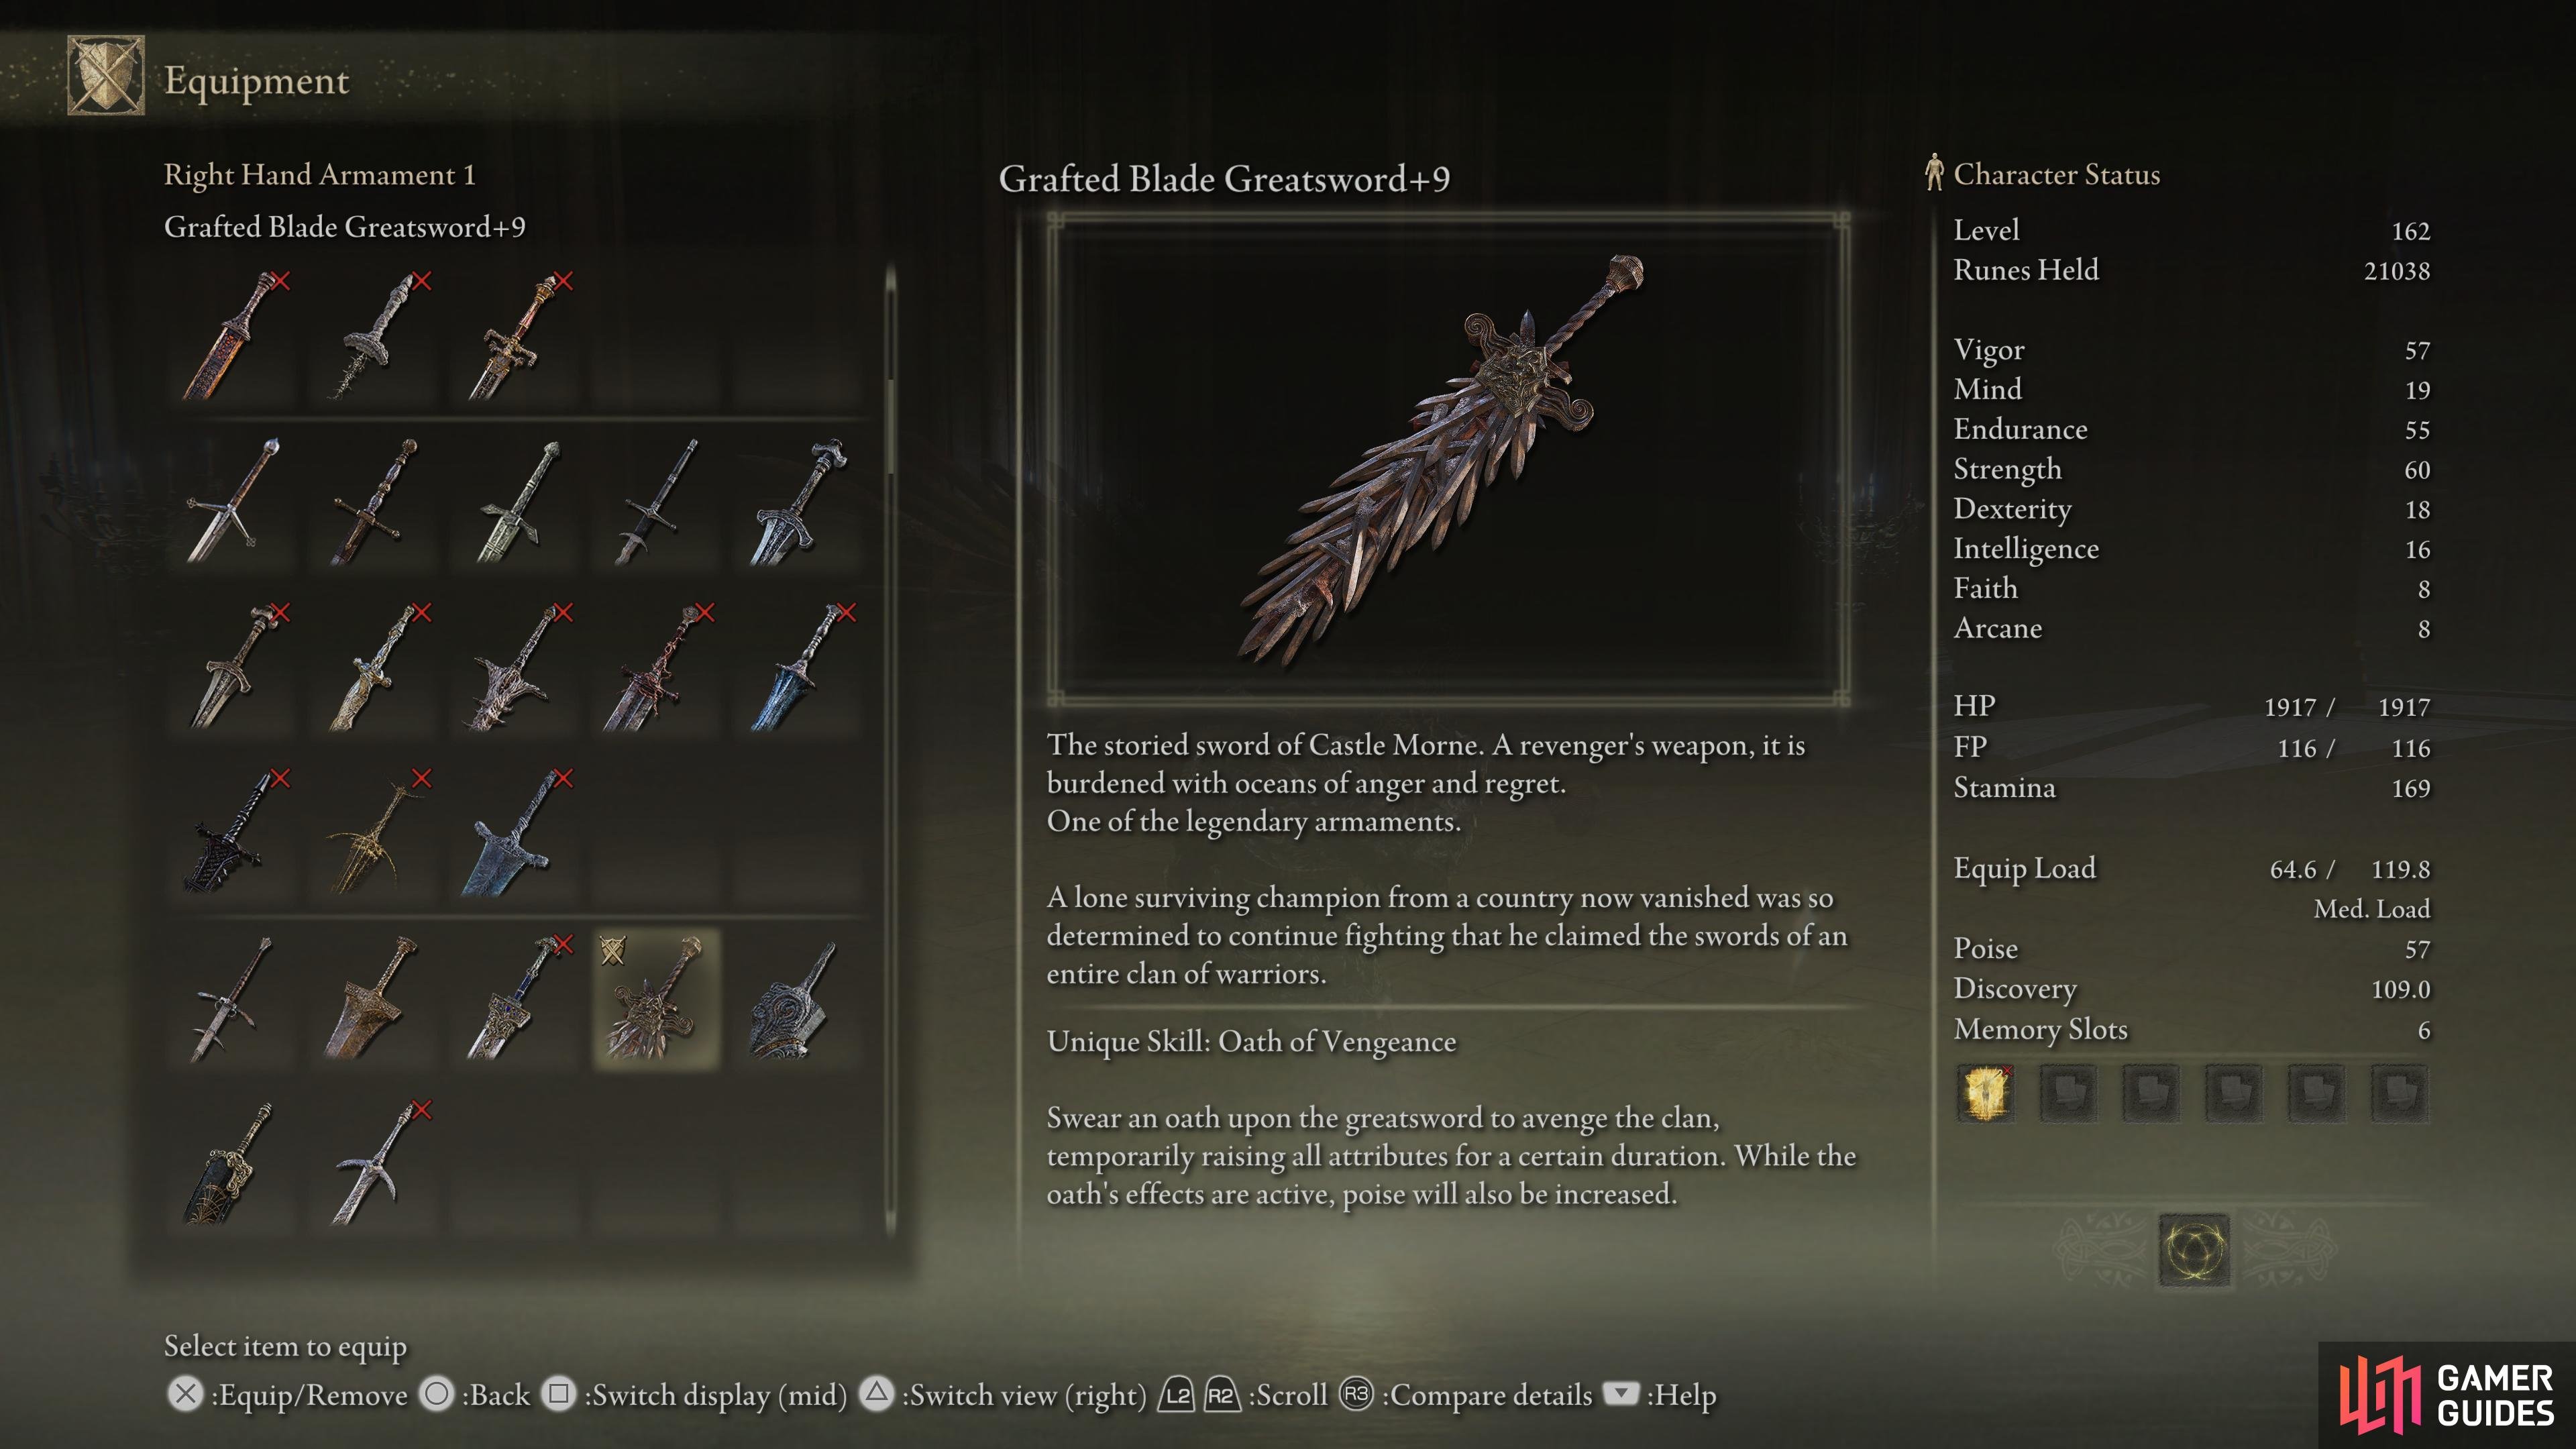 The Grafted Blade Greatsword can be found by defeating Leonine Misbegotten at Castle Morne in Weeping Peninsula.